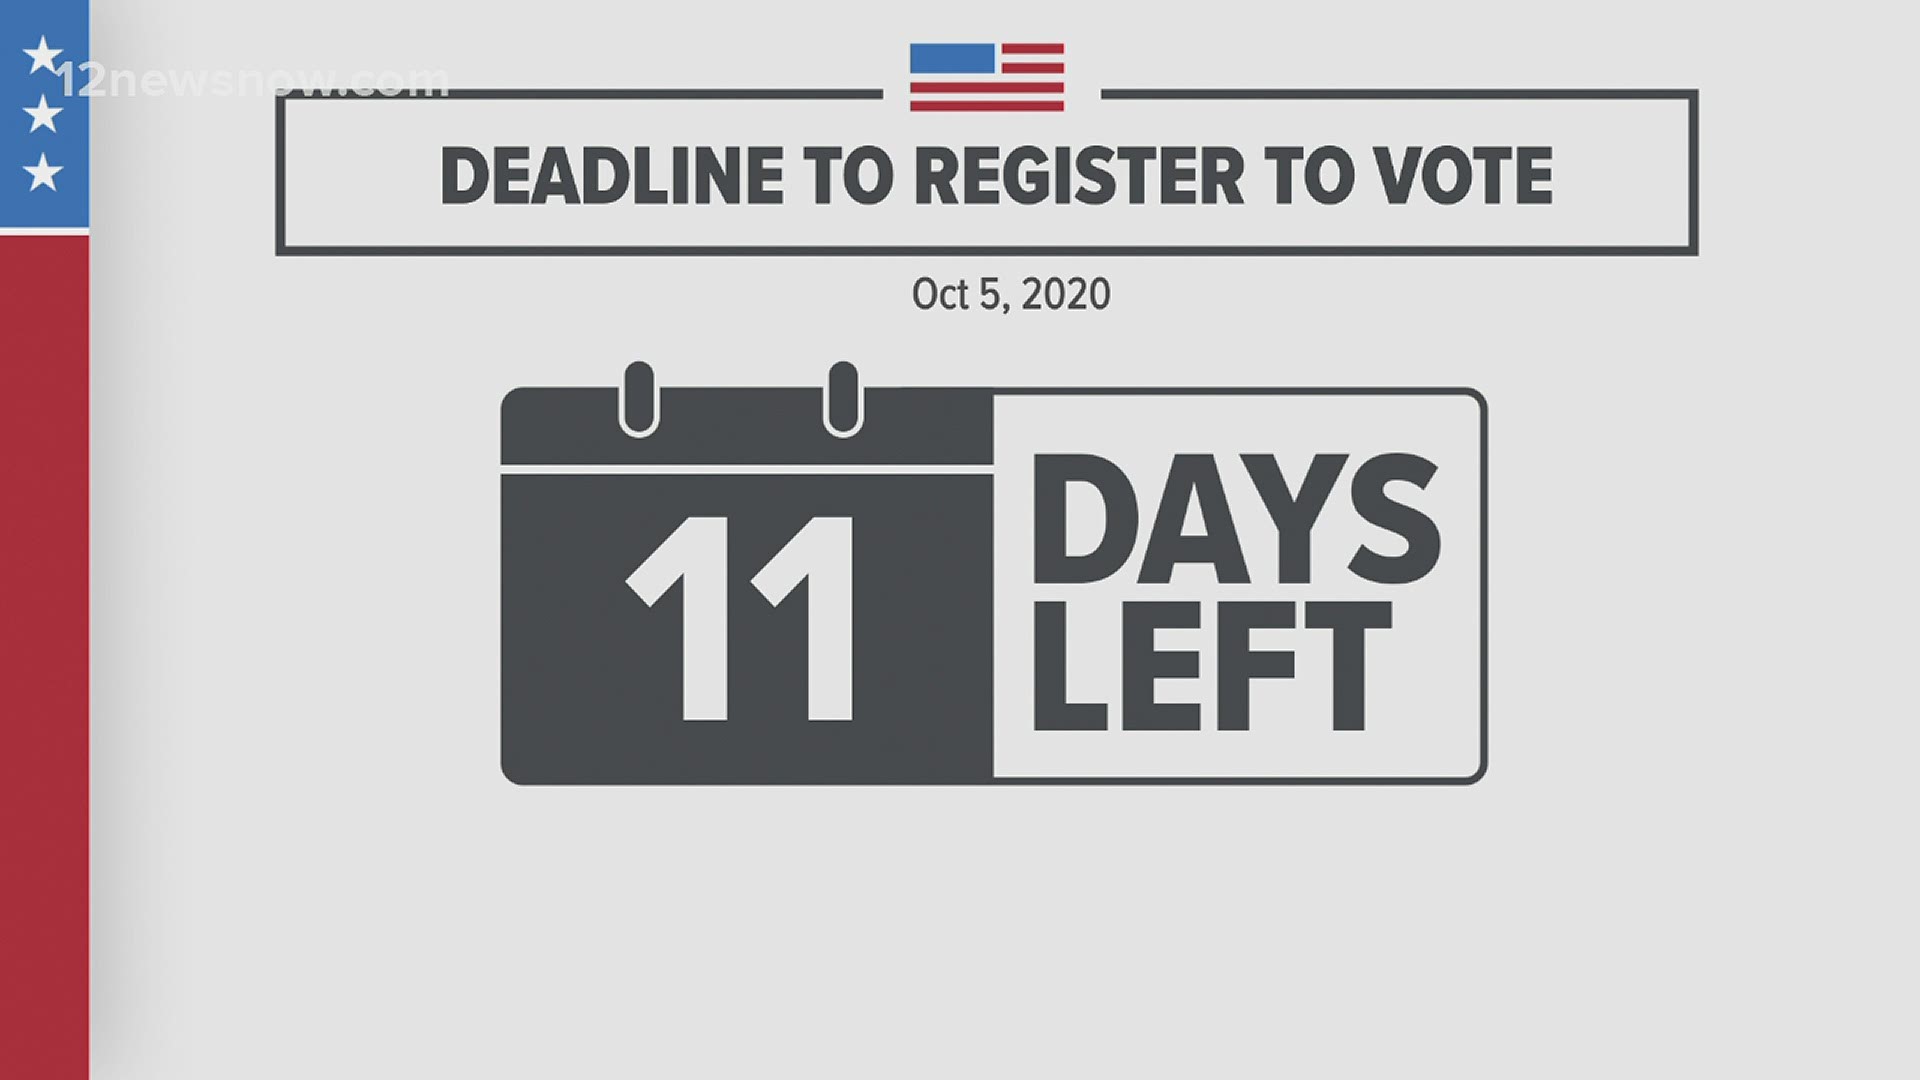 There are 11 days left to register to vote, and Election Day is 40 days away, as of September 24, 2020.